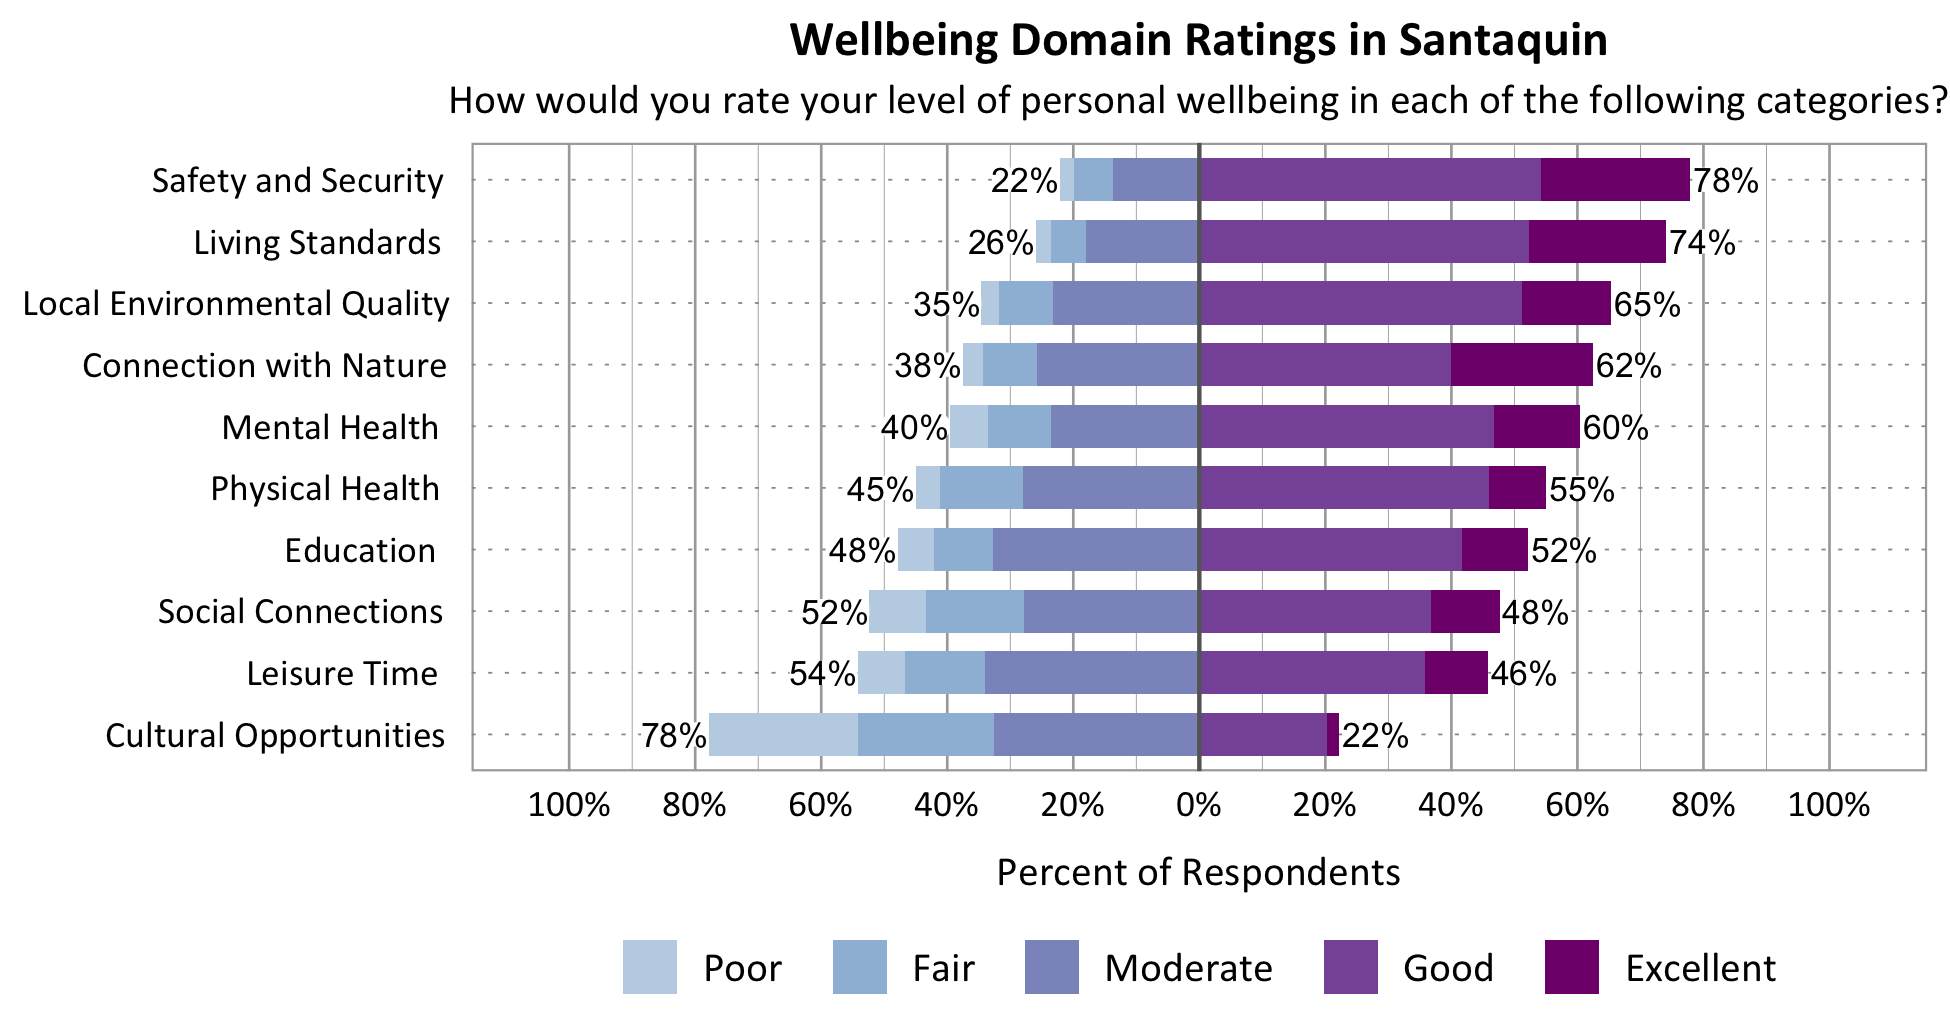 Likert Graph. Title: Wellbeing Domain Importance in Santaquin. Subtitle: How important are the following categories to your overall personal wellbeing? Physical Health - 45% of respondents rated as not at all important, slightly important, or moderately important while 65% rated as important or very important; Category: Safety and Security 22% of respondents rated as not at all important, slightly important, or moderately important while 78% rated as important or very important; Category: Mental Health - 40% of respondents rated as not at all important, slightly important, or moderately important while 60% rated as important or very important; Category: Living Standards - 26% of respondents rated as not at all important, slightly important, or moderately important while 74% rated as important or very important; Category: Local Environmental Quality - 35% of respondents rated as not at all important, slightly important, or moderately important while 65% of respondents rated as important or very important; Category: Leisure Time – 54% of respondents rated as not at all important, slightly important, or moderately important while 46% rated as important or very important; Category: Connection with Nature - 38% of respondents rated as not at all important, slightly important, or moderately important while 62% rated as important or very important; Category: Education - 48% of respondents rated as not at all important, slightly important, or moderately important while 52% rated as important or very important; Category: Social Connections - 52% rated as not at all important, slightly important, or moderately important while 48% rated as important or very important; Category: Cultural Opportunities - 78% rated as not at all important, slightly important, or moderately important while 22% rated as important or very important.